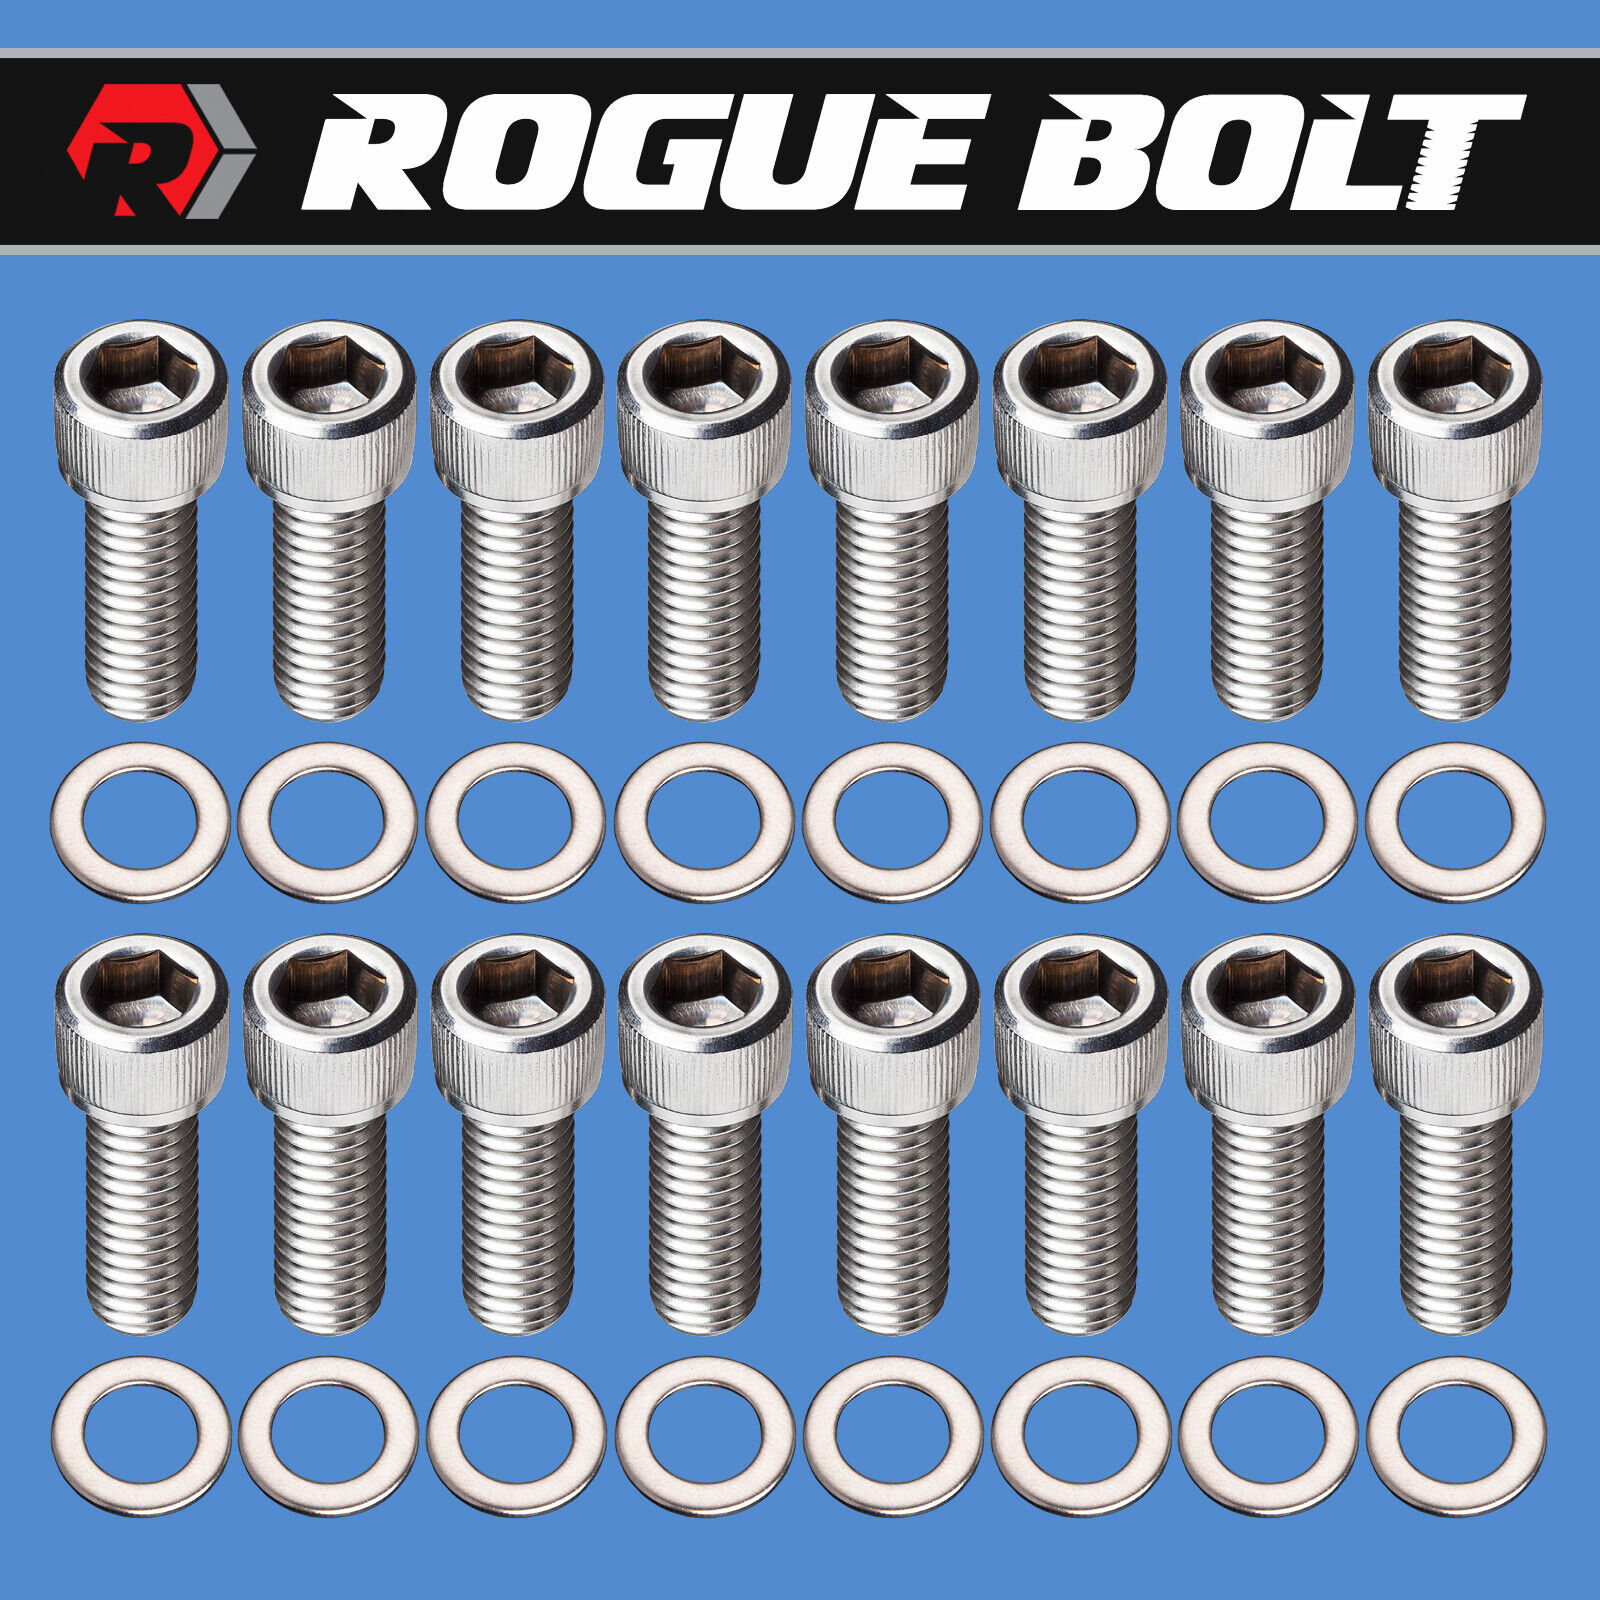 FORD FE HEADER BOLTS STAINLESS STEEL KIT 352 360 390 406 427 428 ENGINES